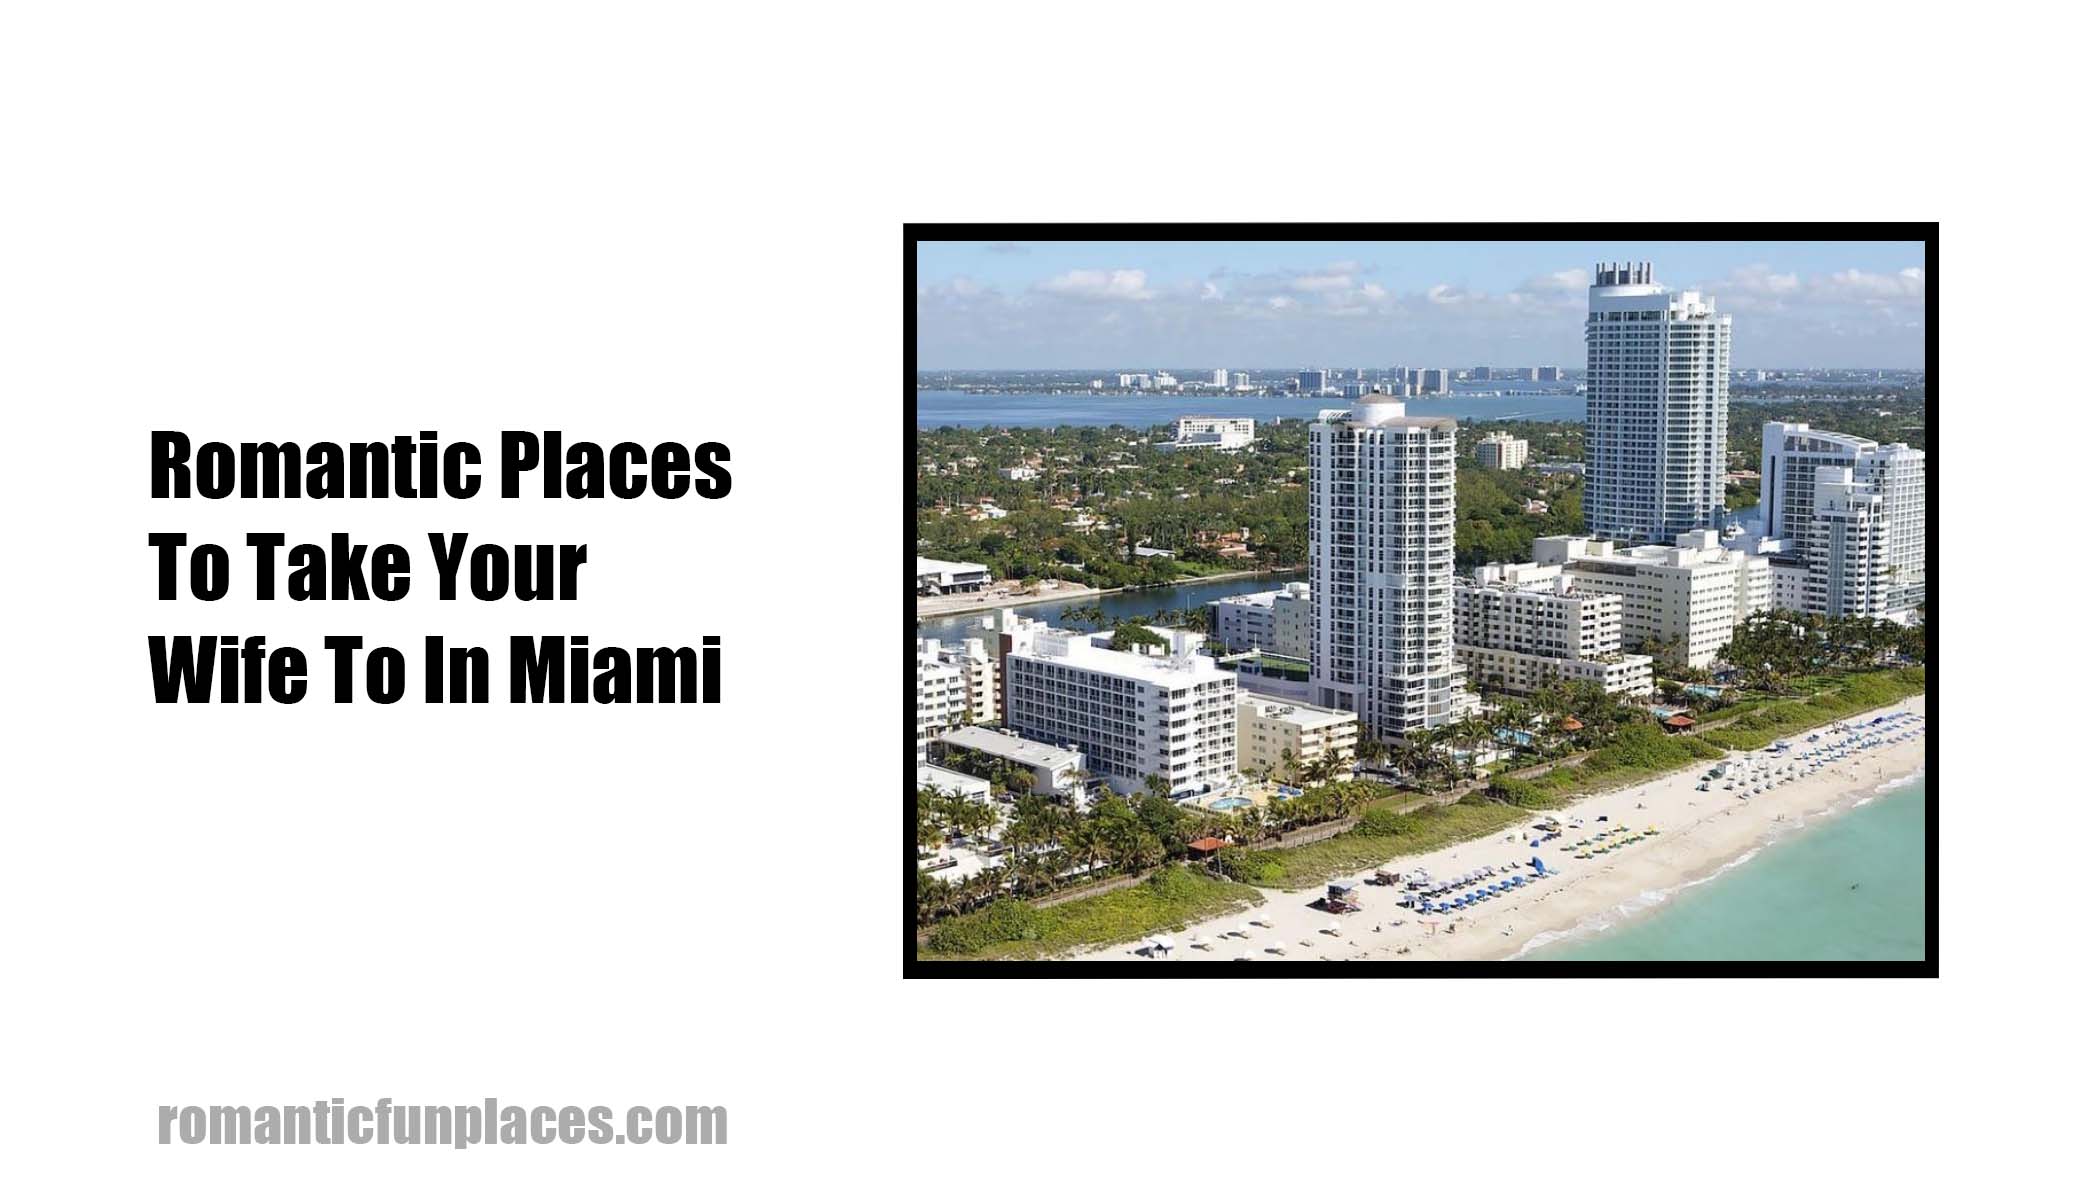 Romantic Places To Take Your Wife To In Miami